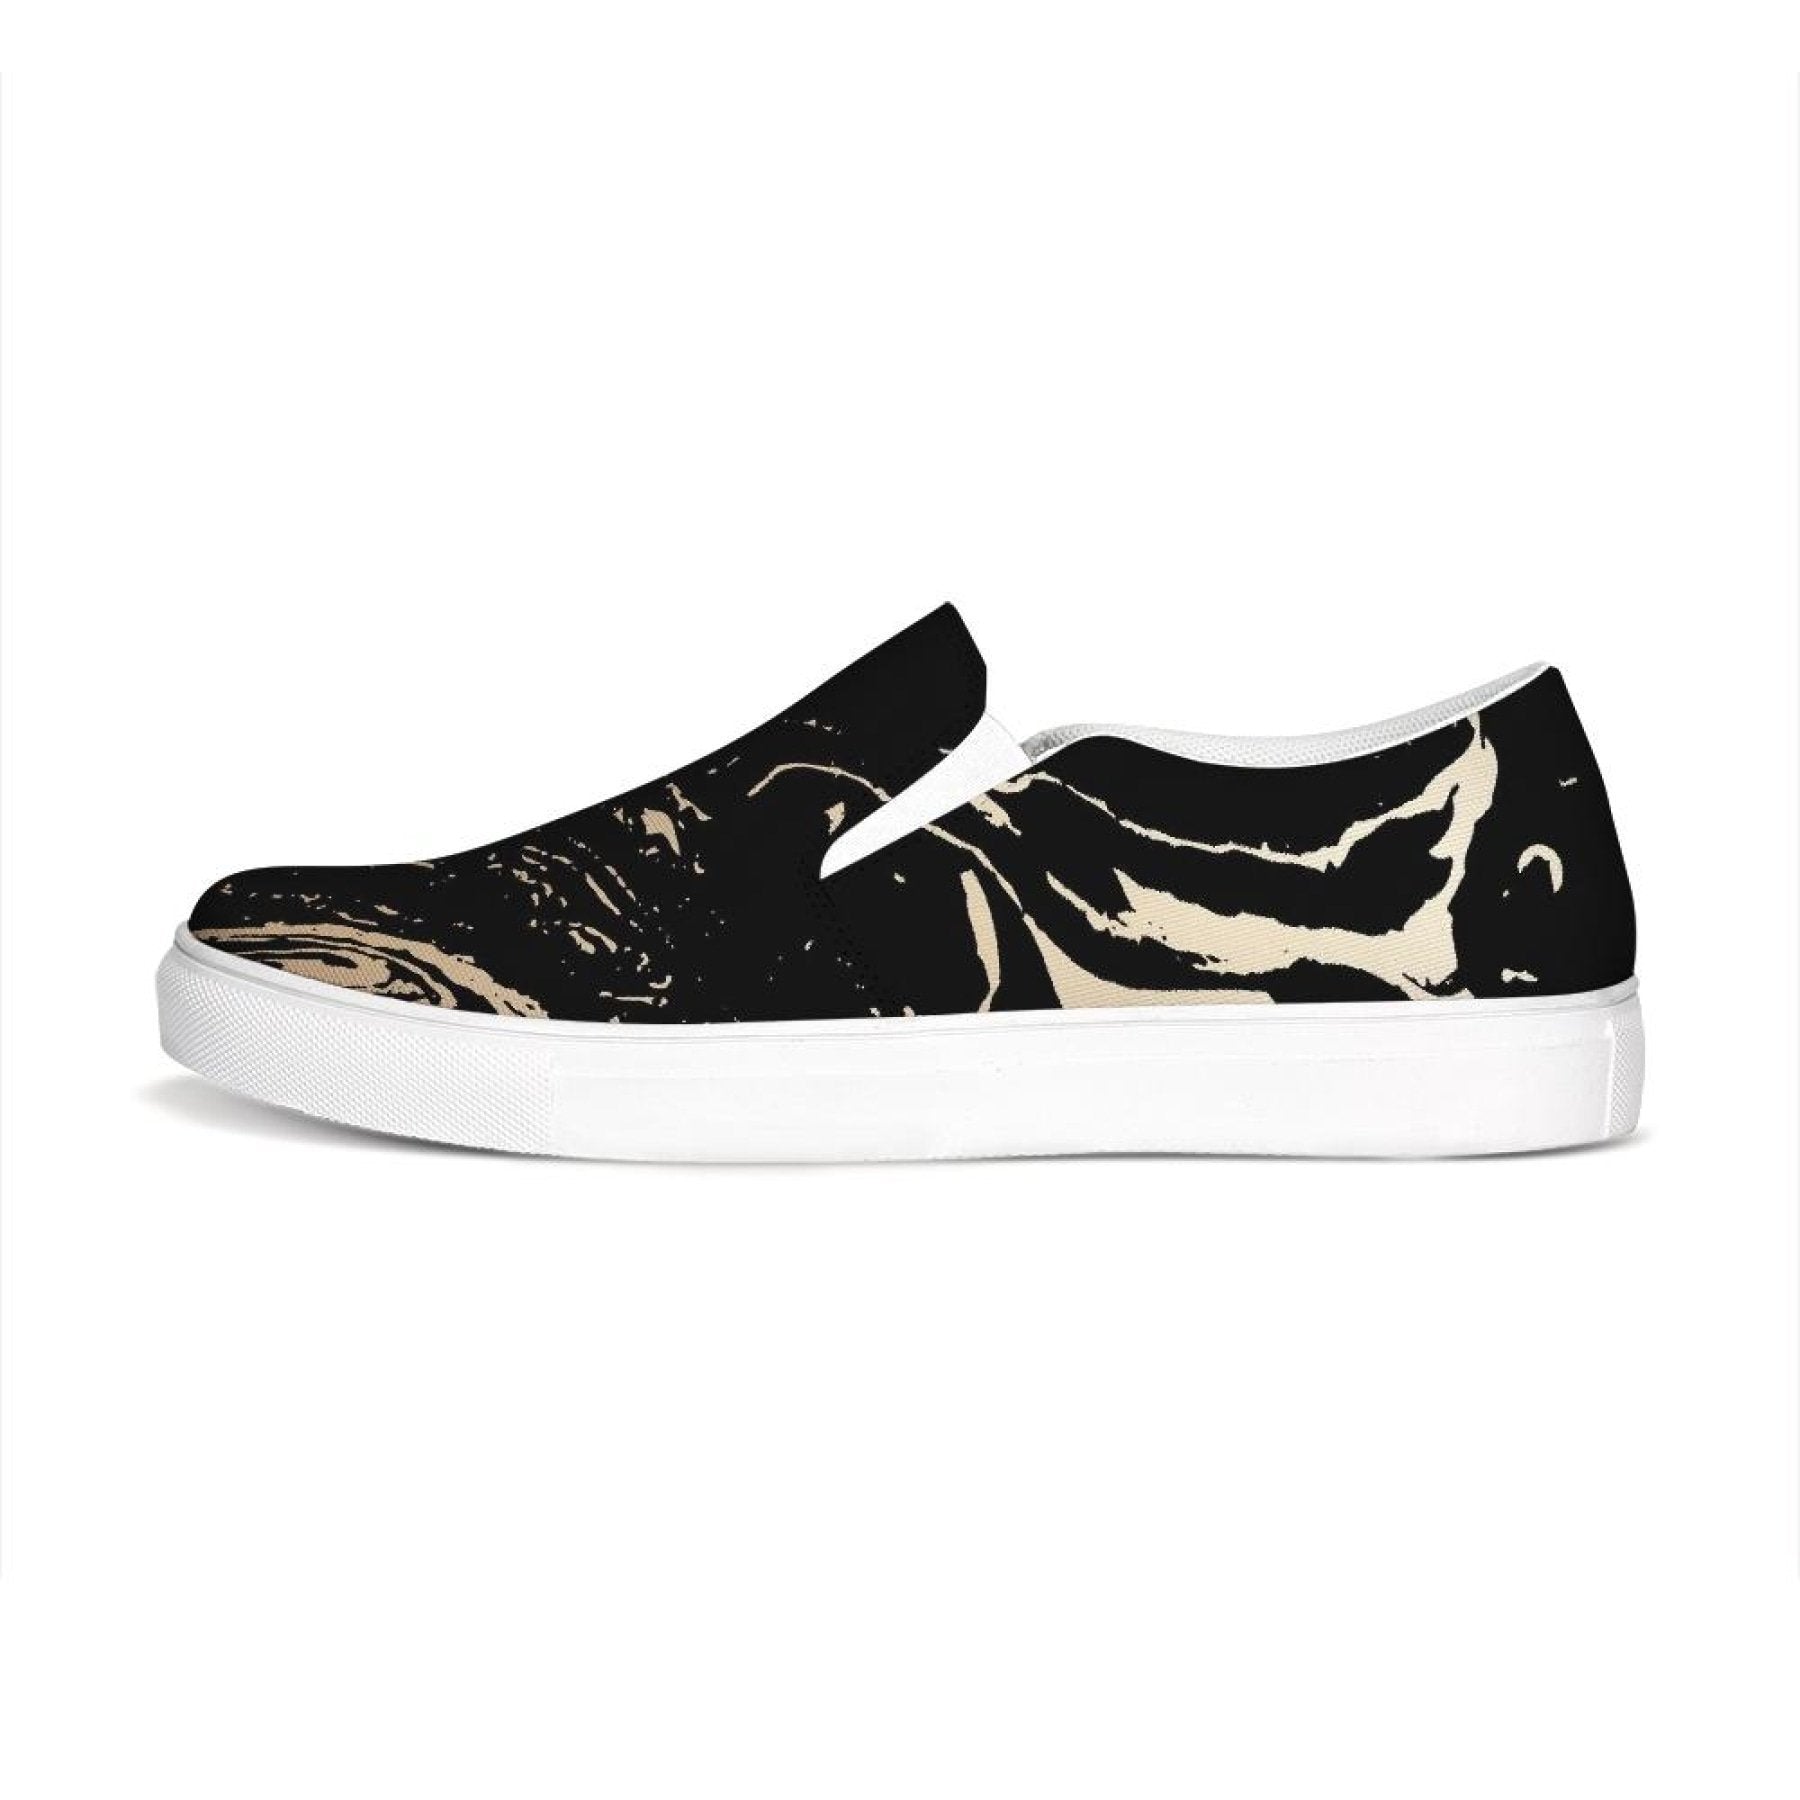 Uniquely You Womens Sneakers - Black & Beige Swirl Style Low Top